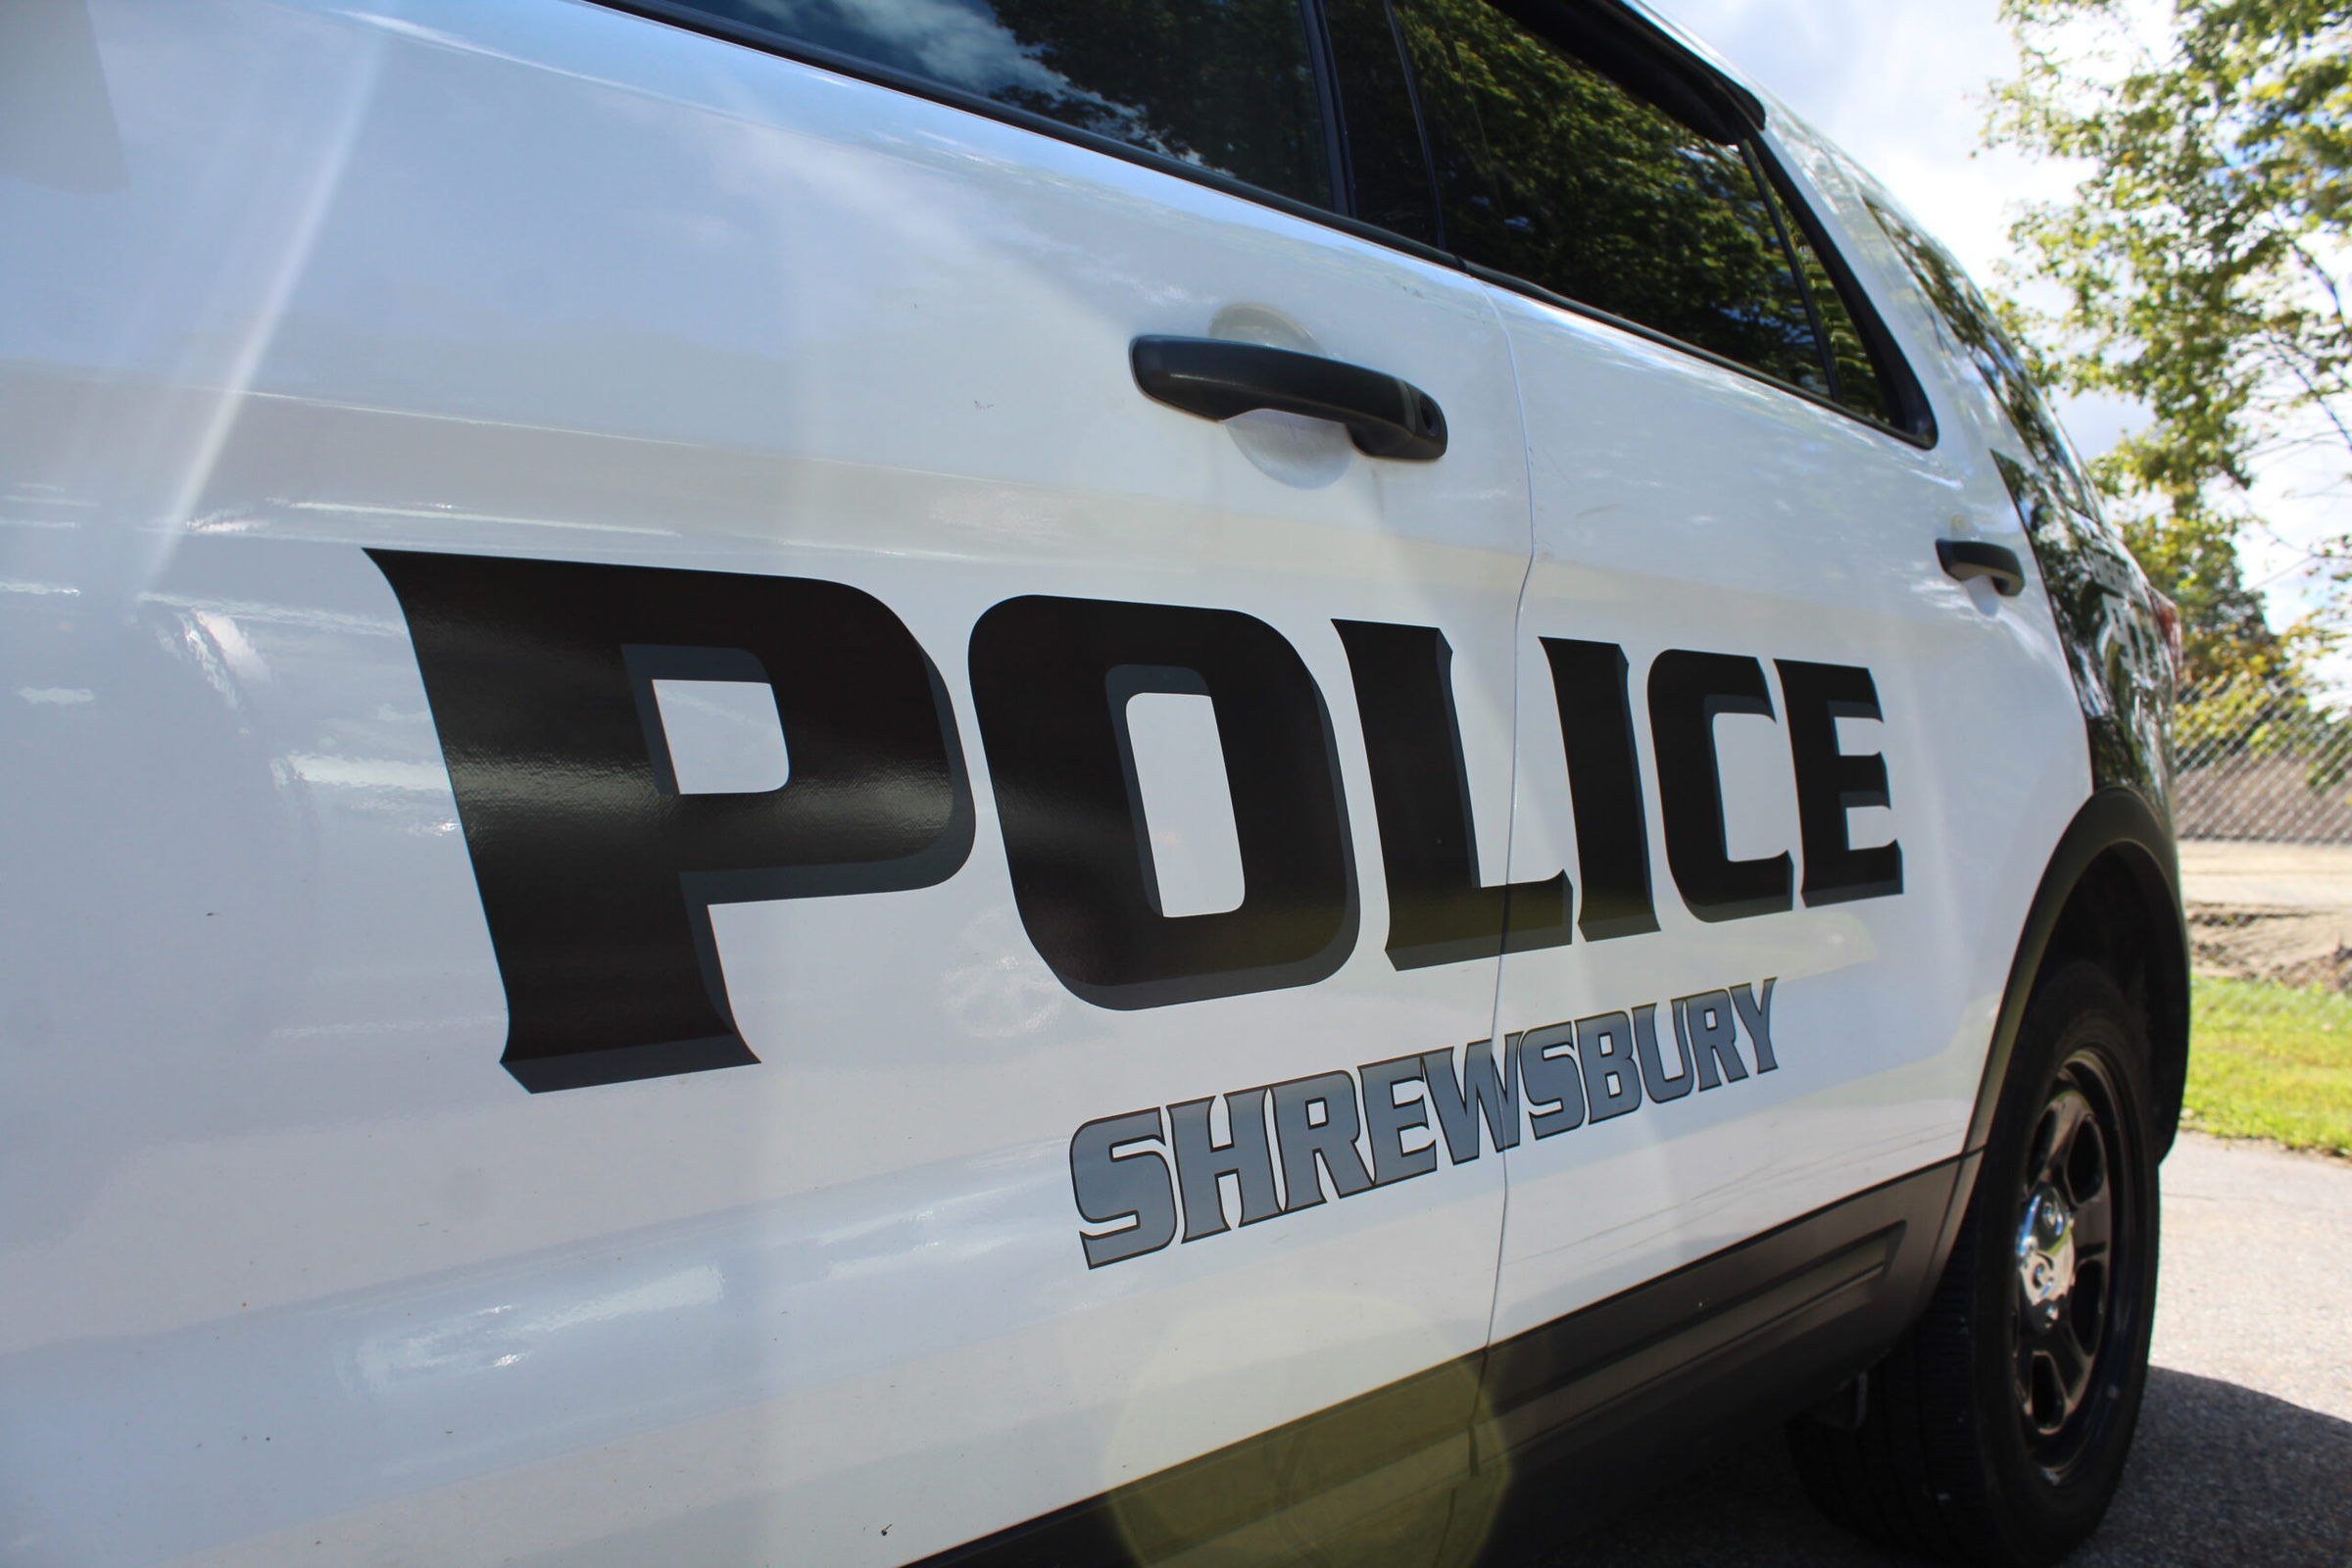 Pair arrested by Shrewsbury police for used cooking oil theft